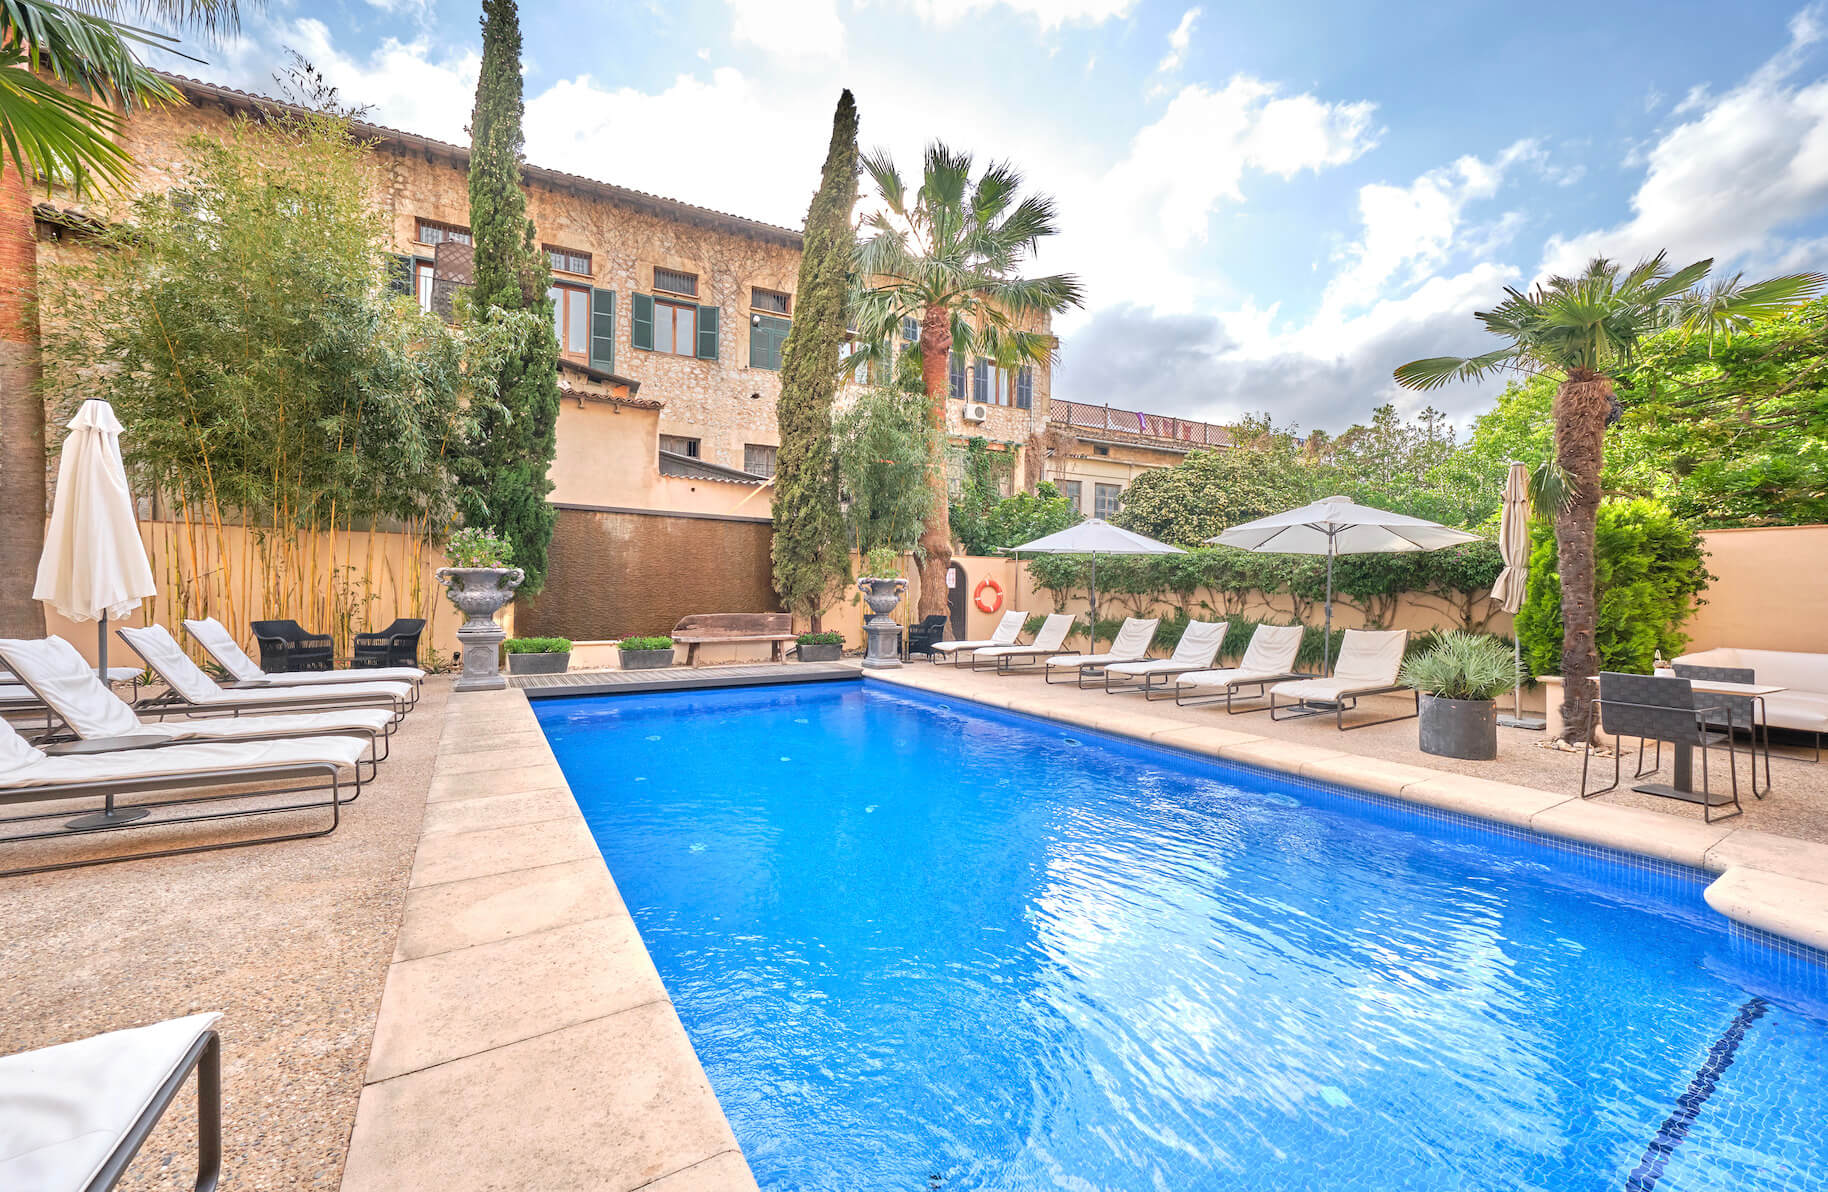 LUXURIA LIFESTYLE'S INTERNATIONAL GROUP EDITOR TRAVELS TO MALLORCA TO REVIEW 3 PREMIUM HOTELS